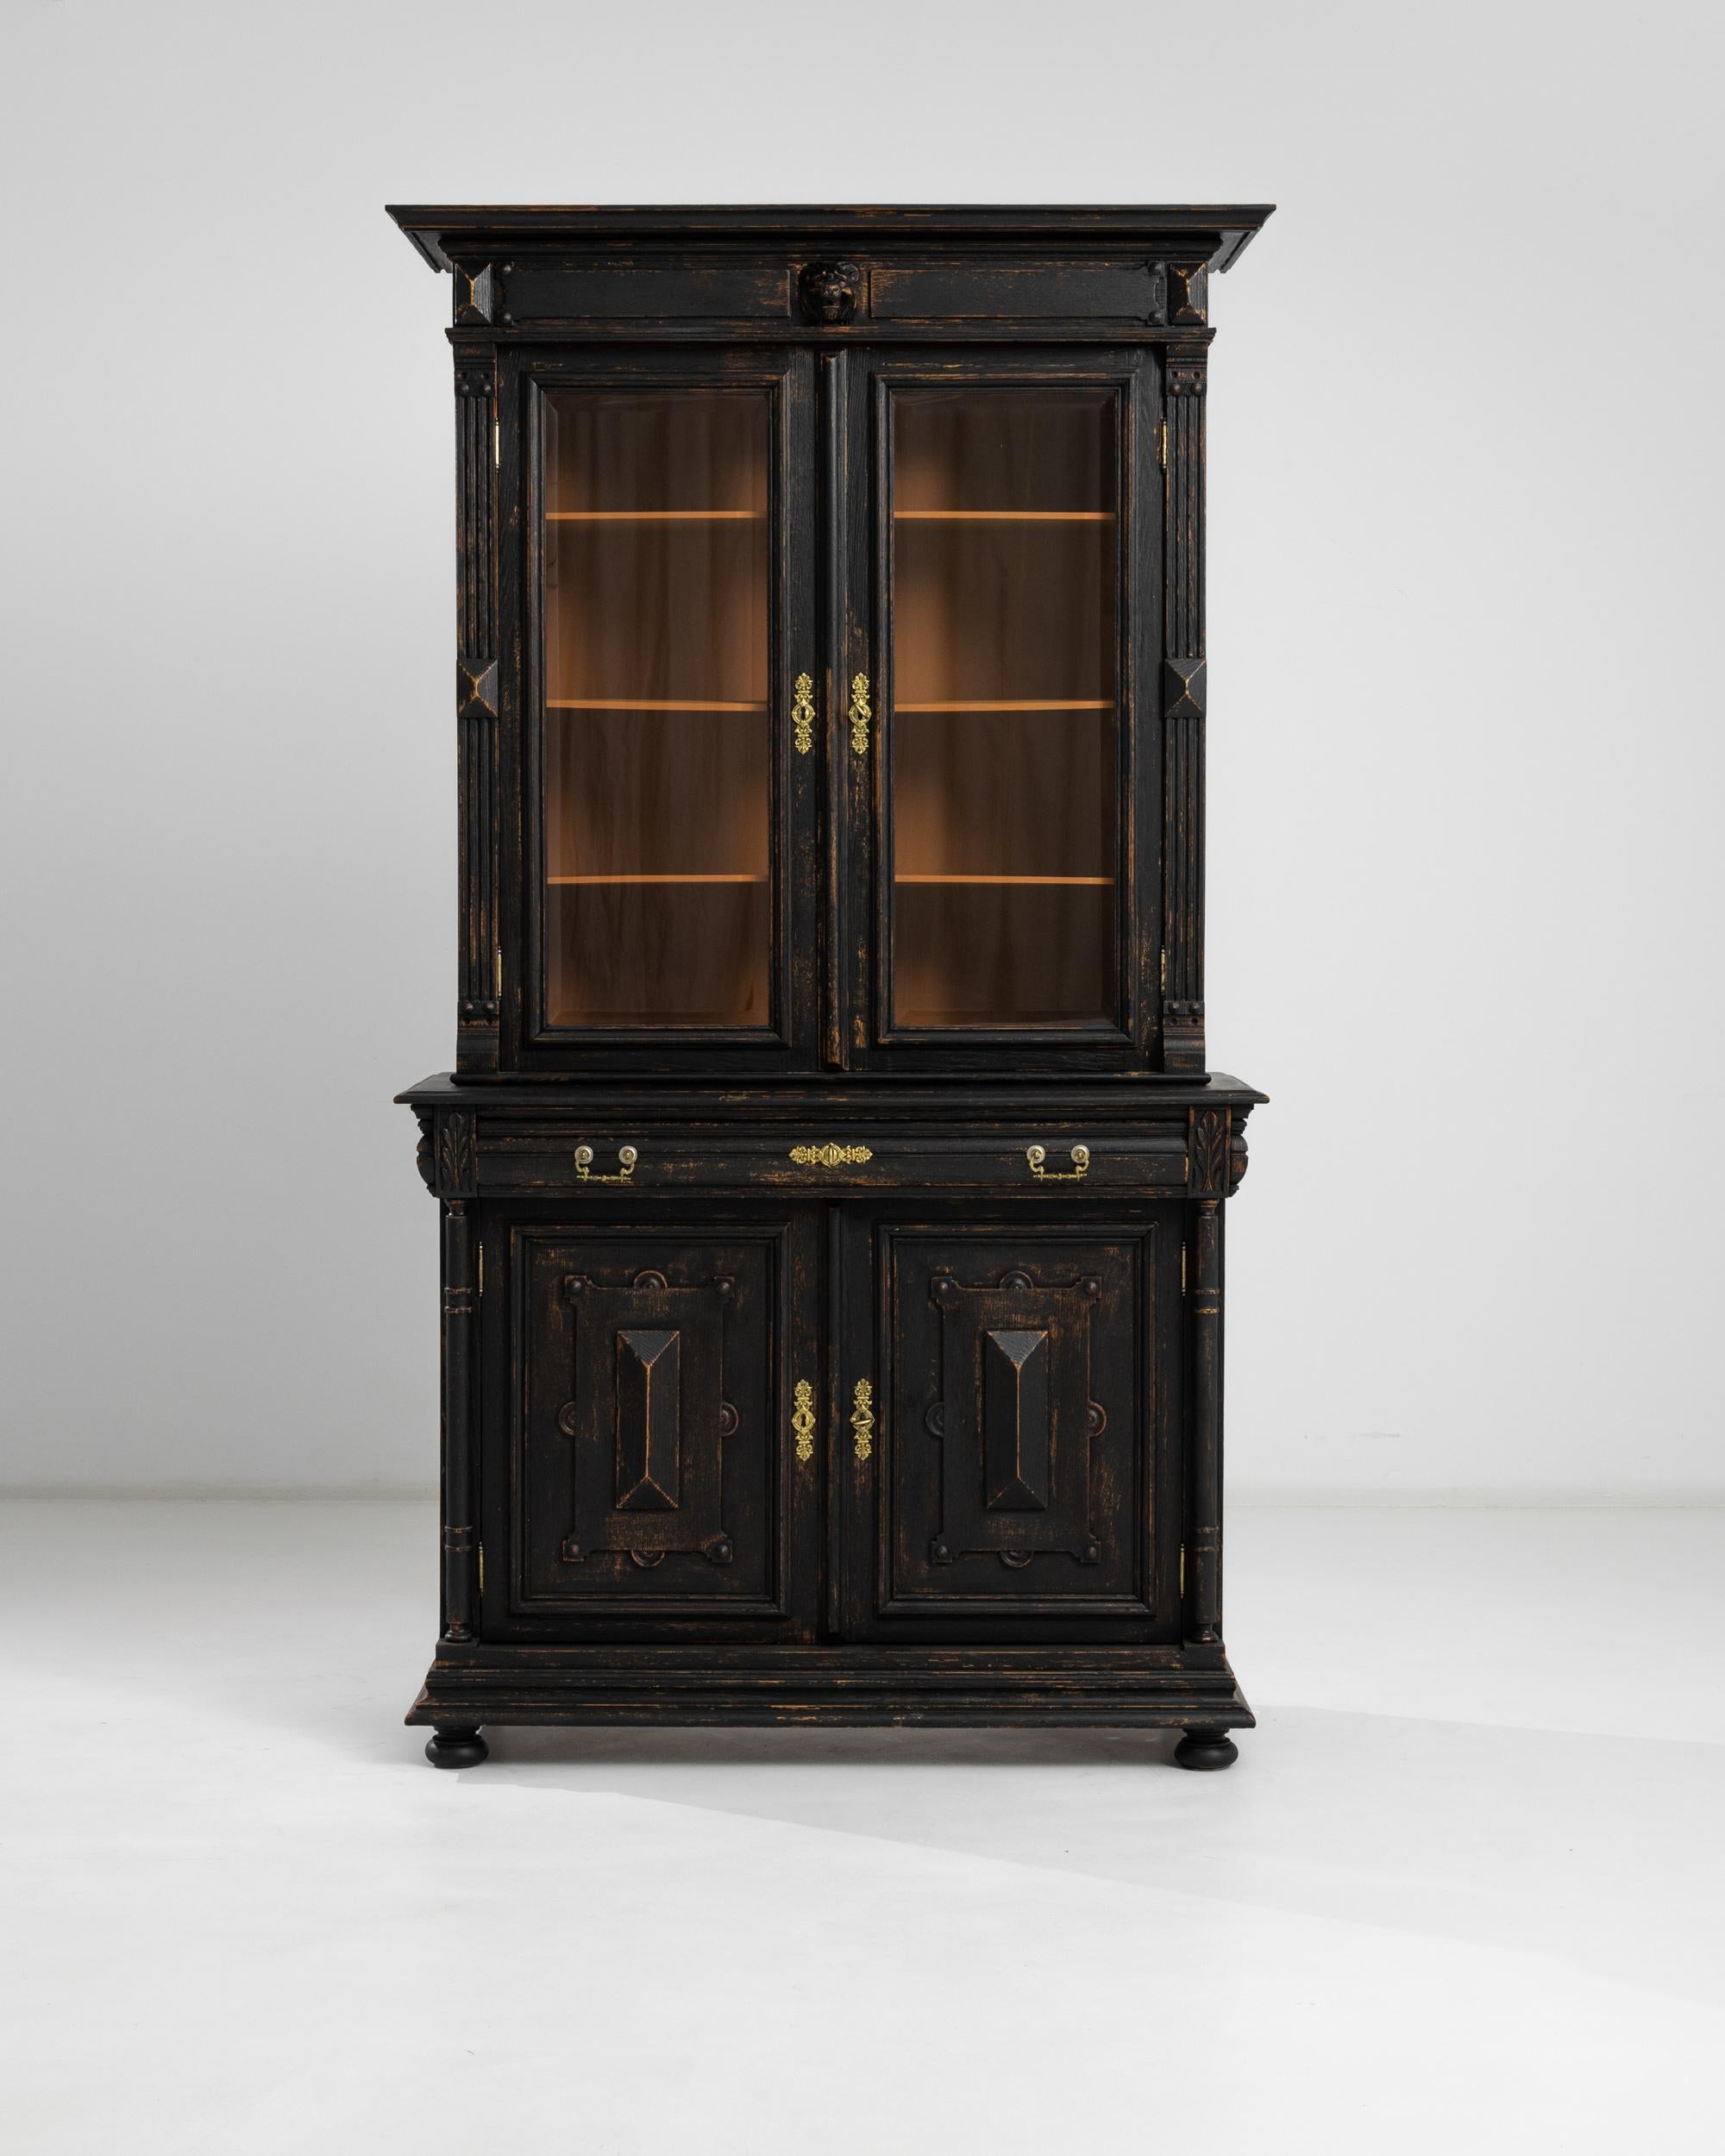 A wooden vitrine with original patina from France, produced circa 1880. A vibrant, antique vitrine constructed of black patinated wood standing at an impressive seven feet tall. Glass double door display peers into orange tinted interior of four